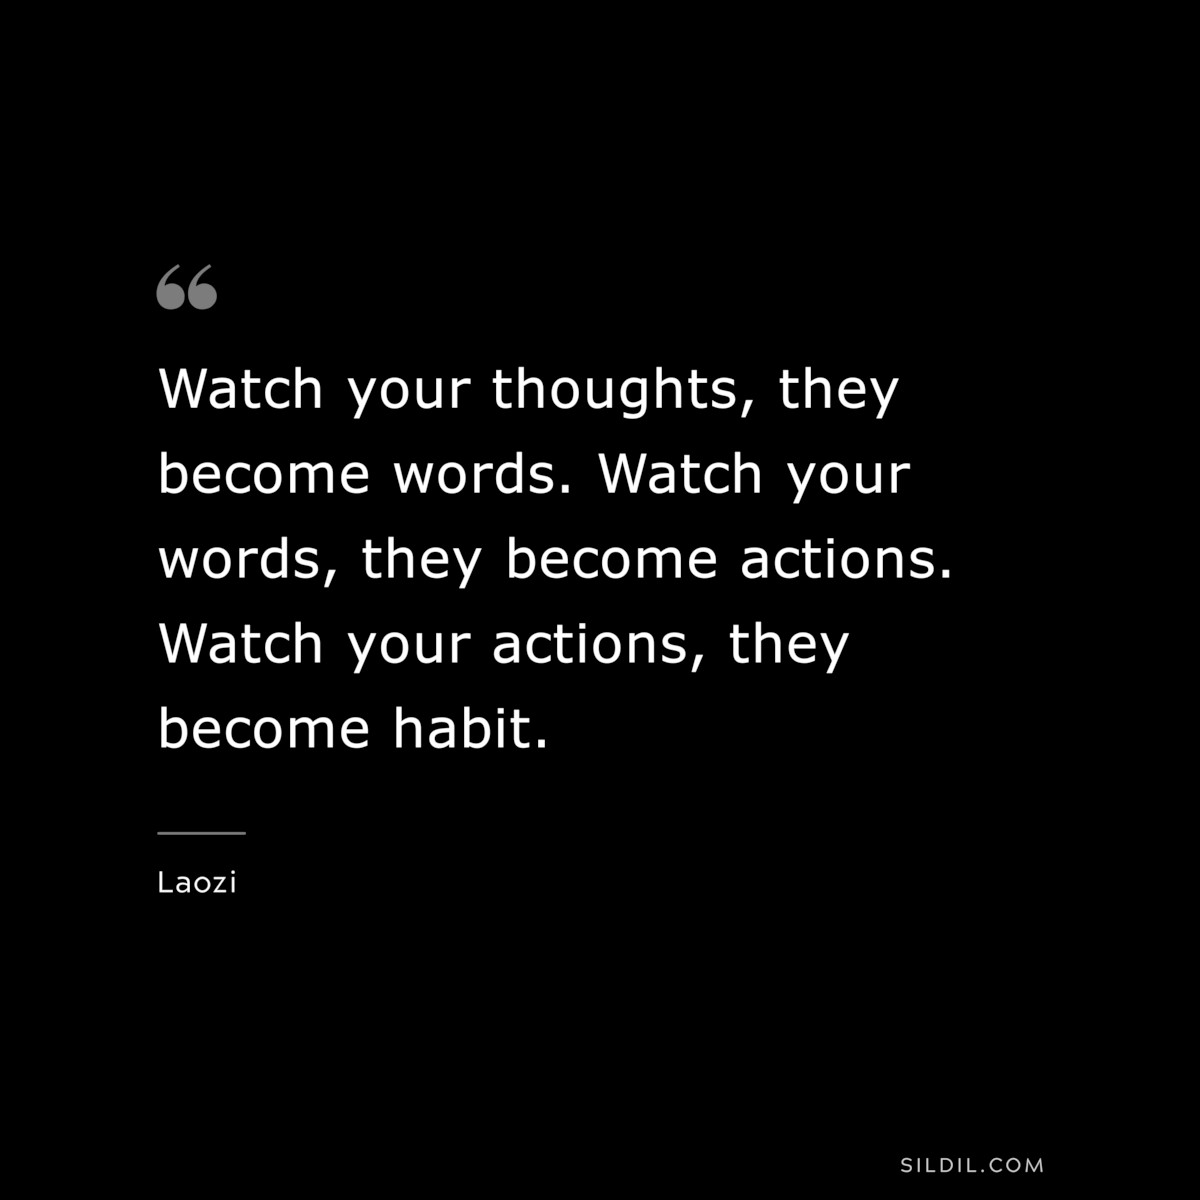 Watch your thoughts, they become words. Watch your words, they become actions. Watch your actions, they become habit. ― Laozi